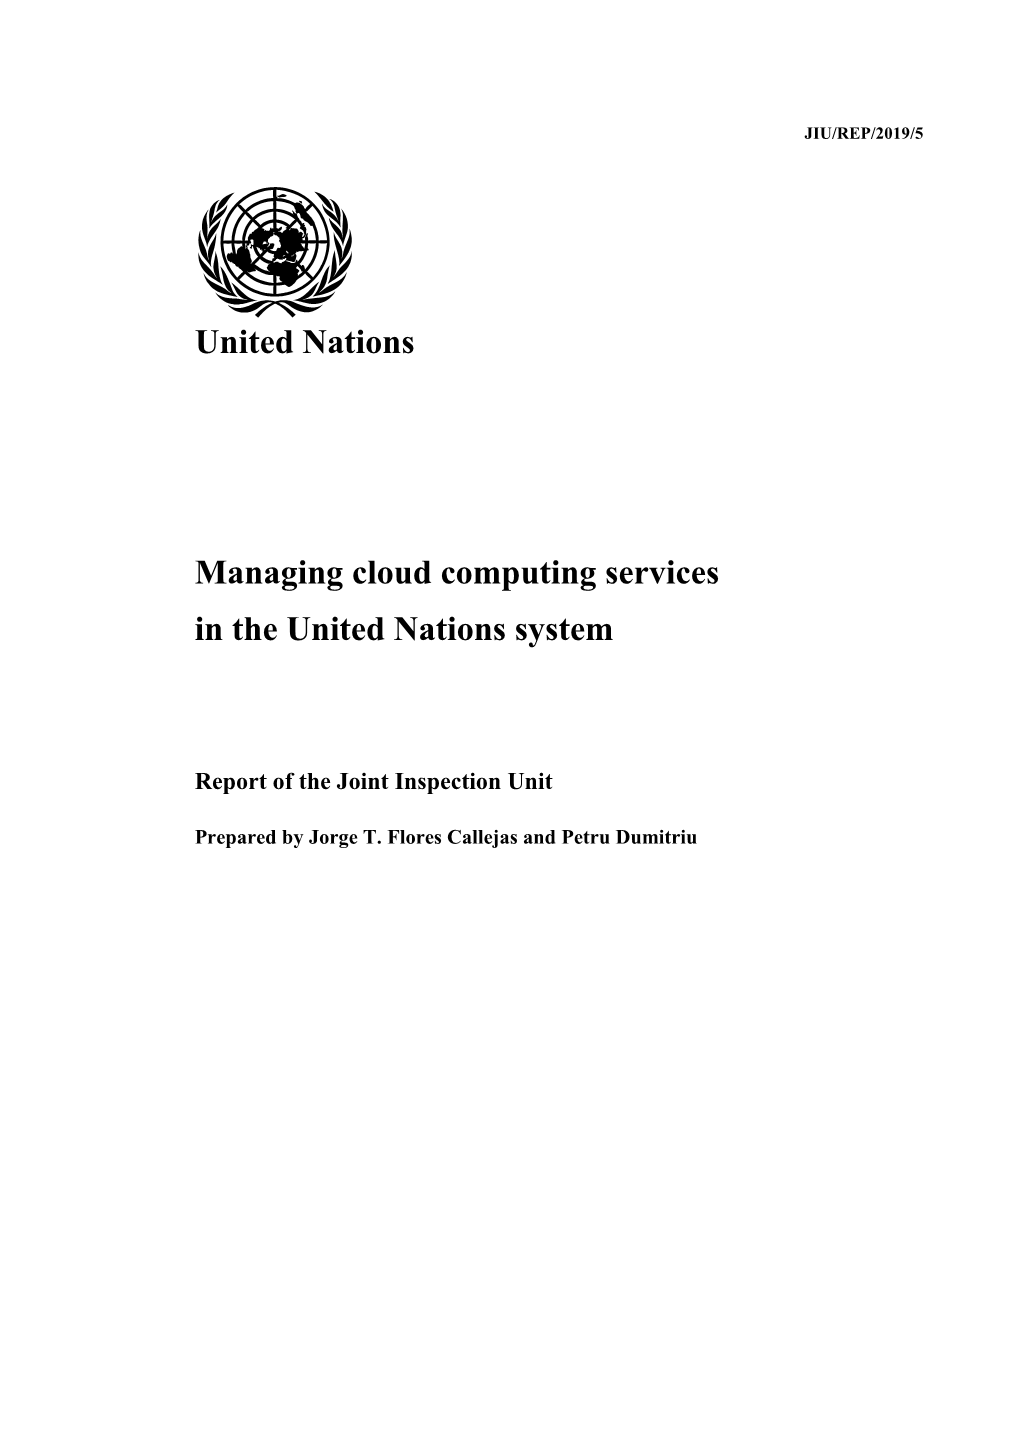 Managing Cloud Computing Services in the United Nations System